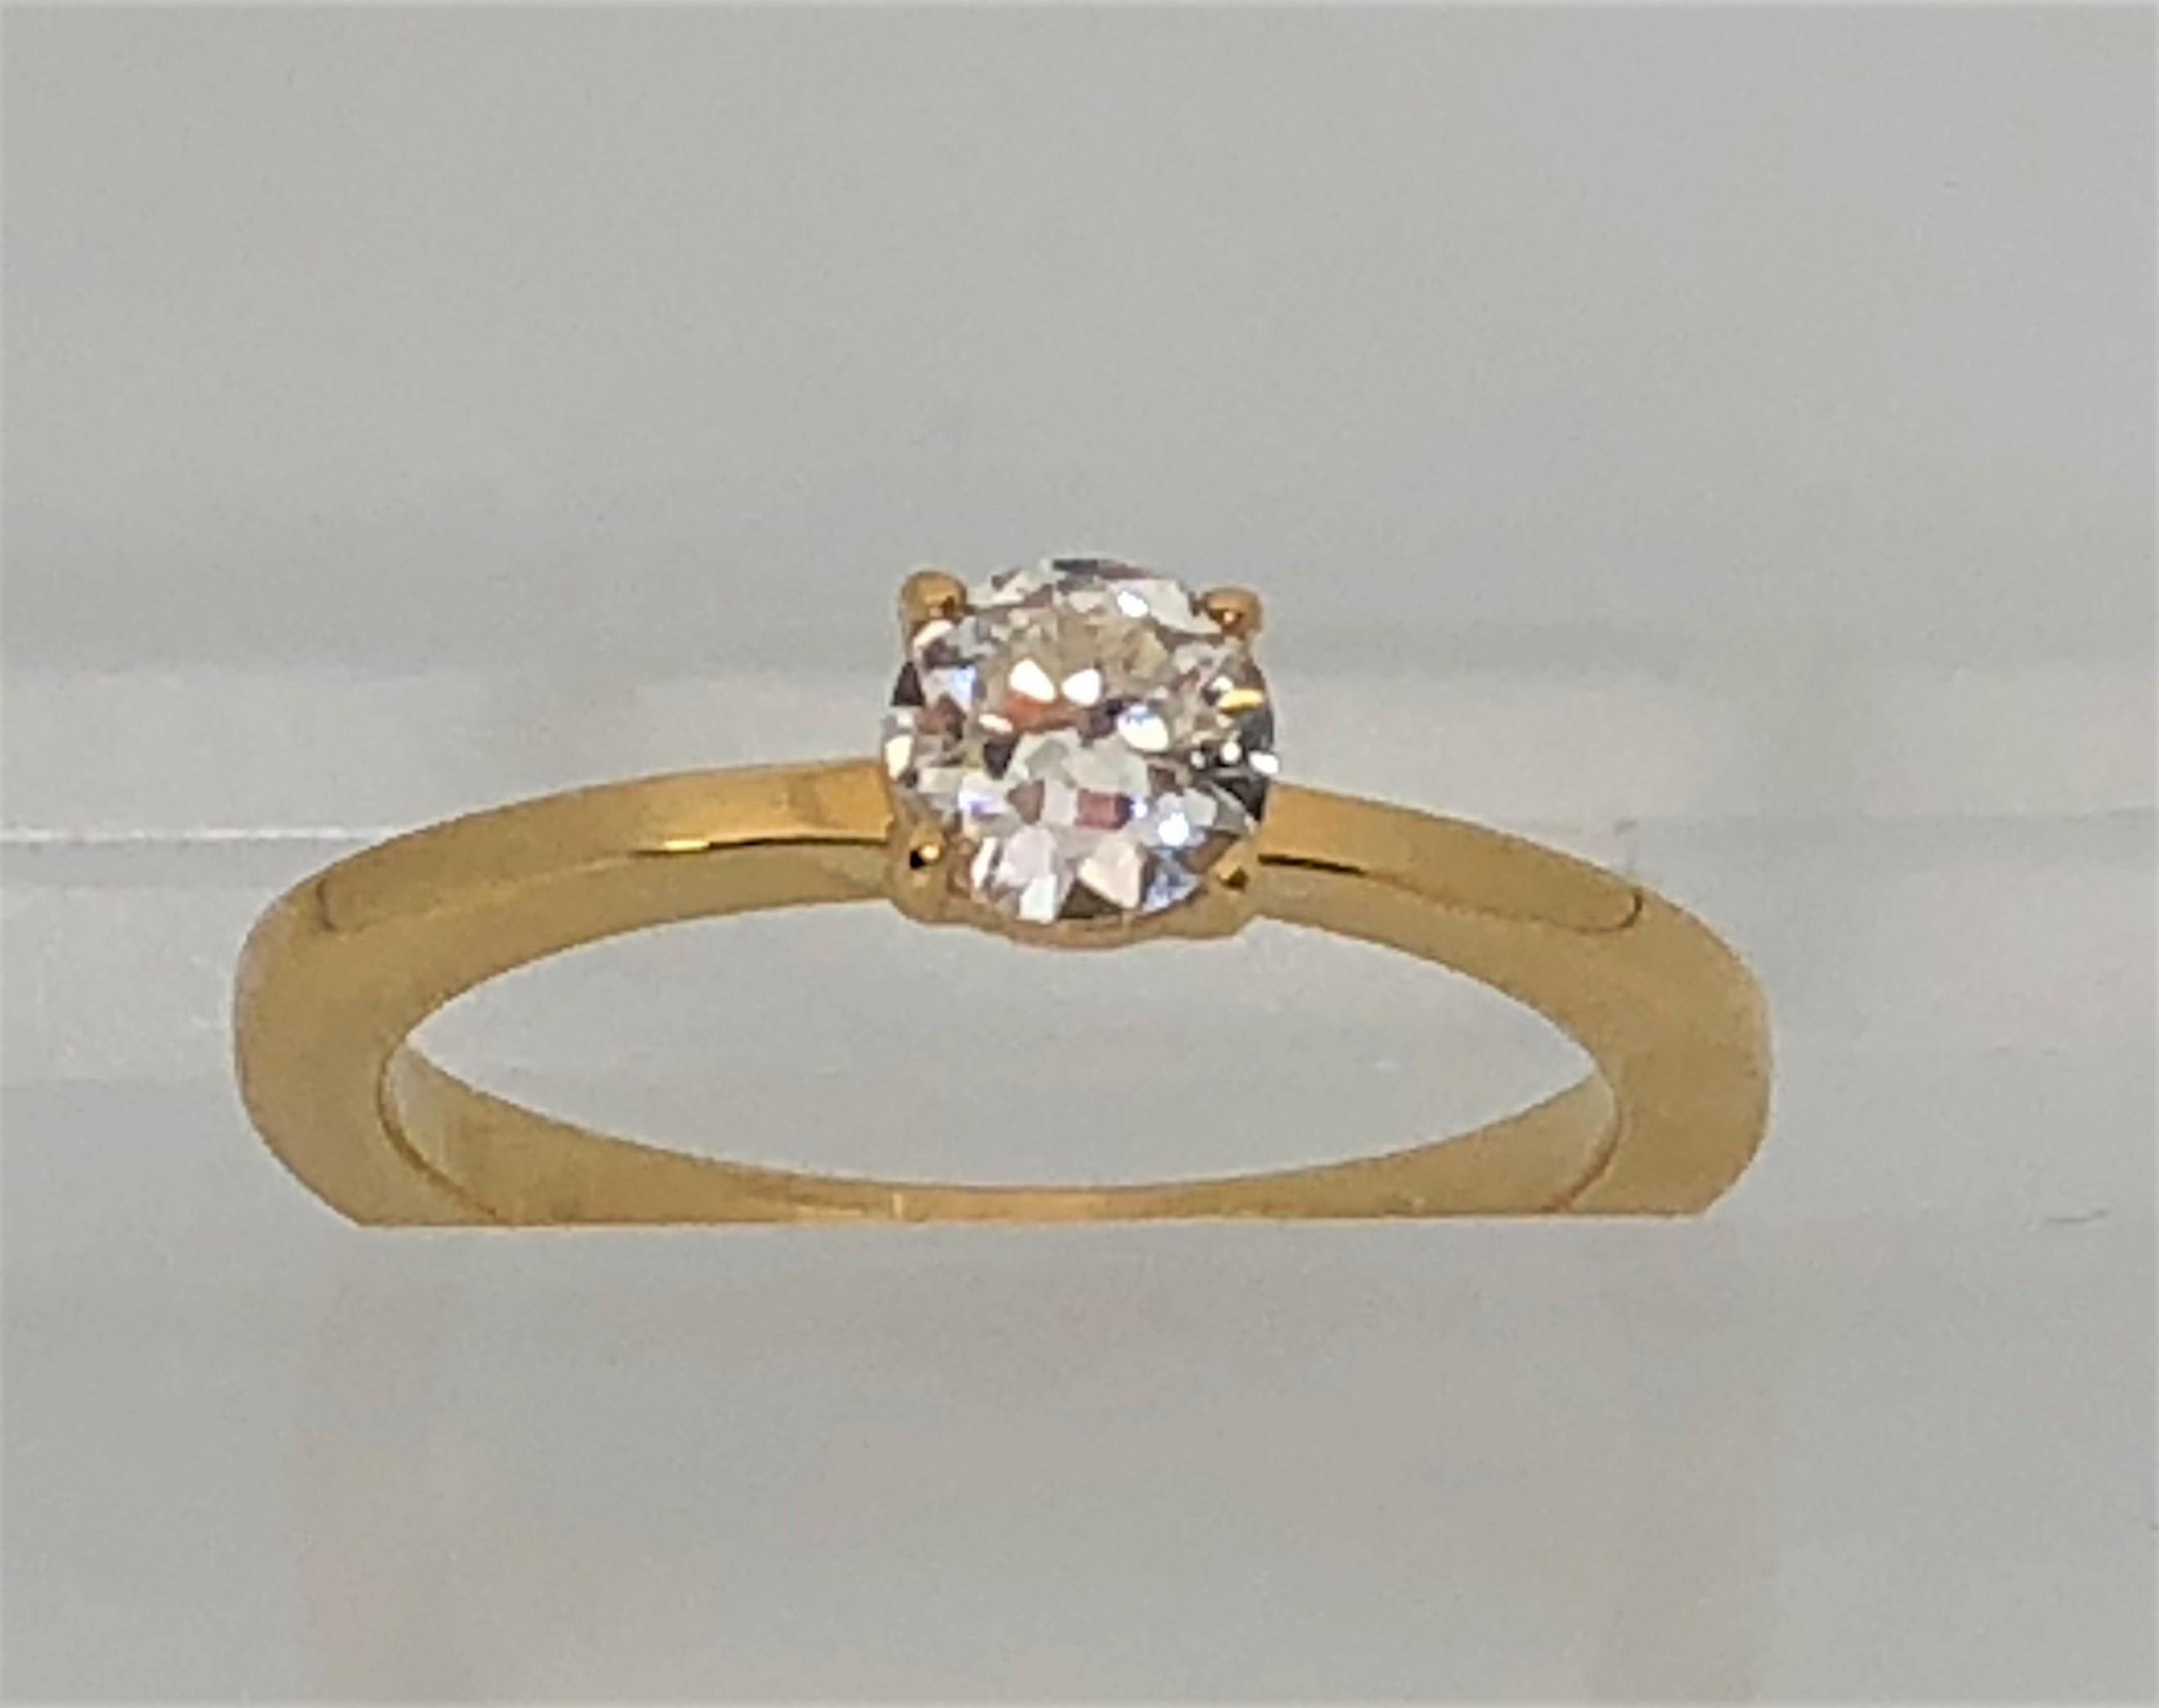 This ring sparkles from across the room!  A true classic. 
18 karat yellow gold band with beautiful prong set round diamond.
Diamond is approximately .36tdw.  G-H color, VS2-SI1 clarity.
Band is approximately 2mm wide
Stamped 